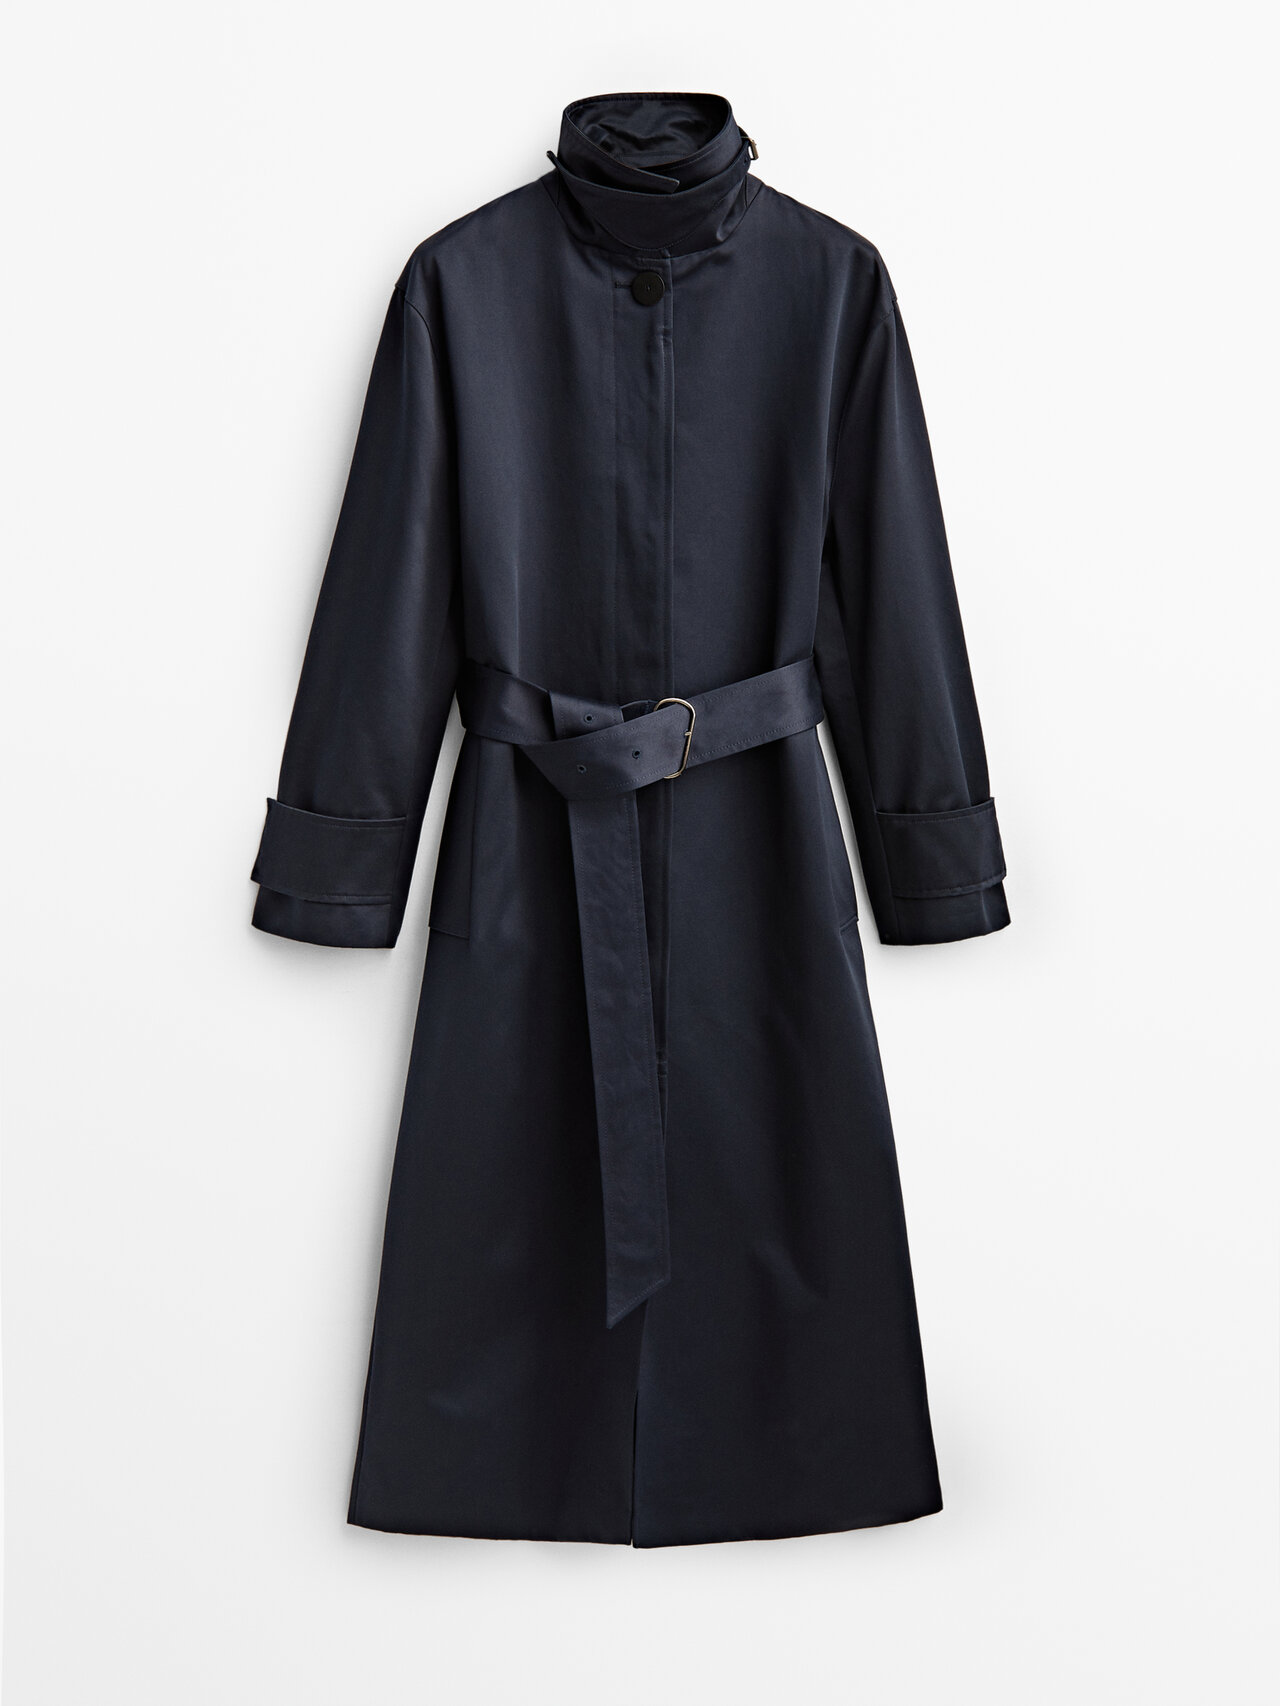 Massimo Dutti Navy Blue Trench Jacket - Limited Edition